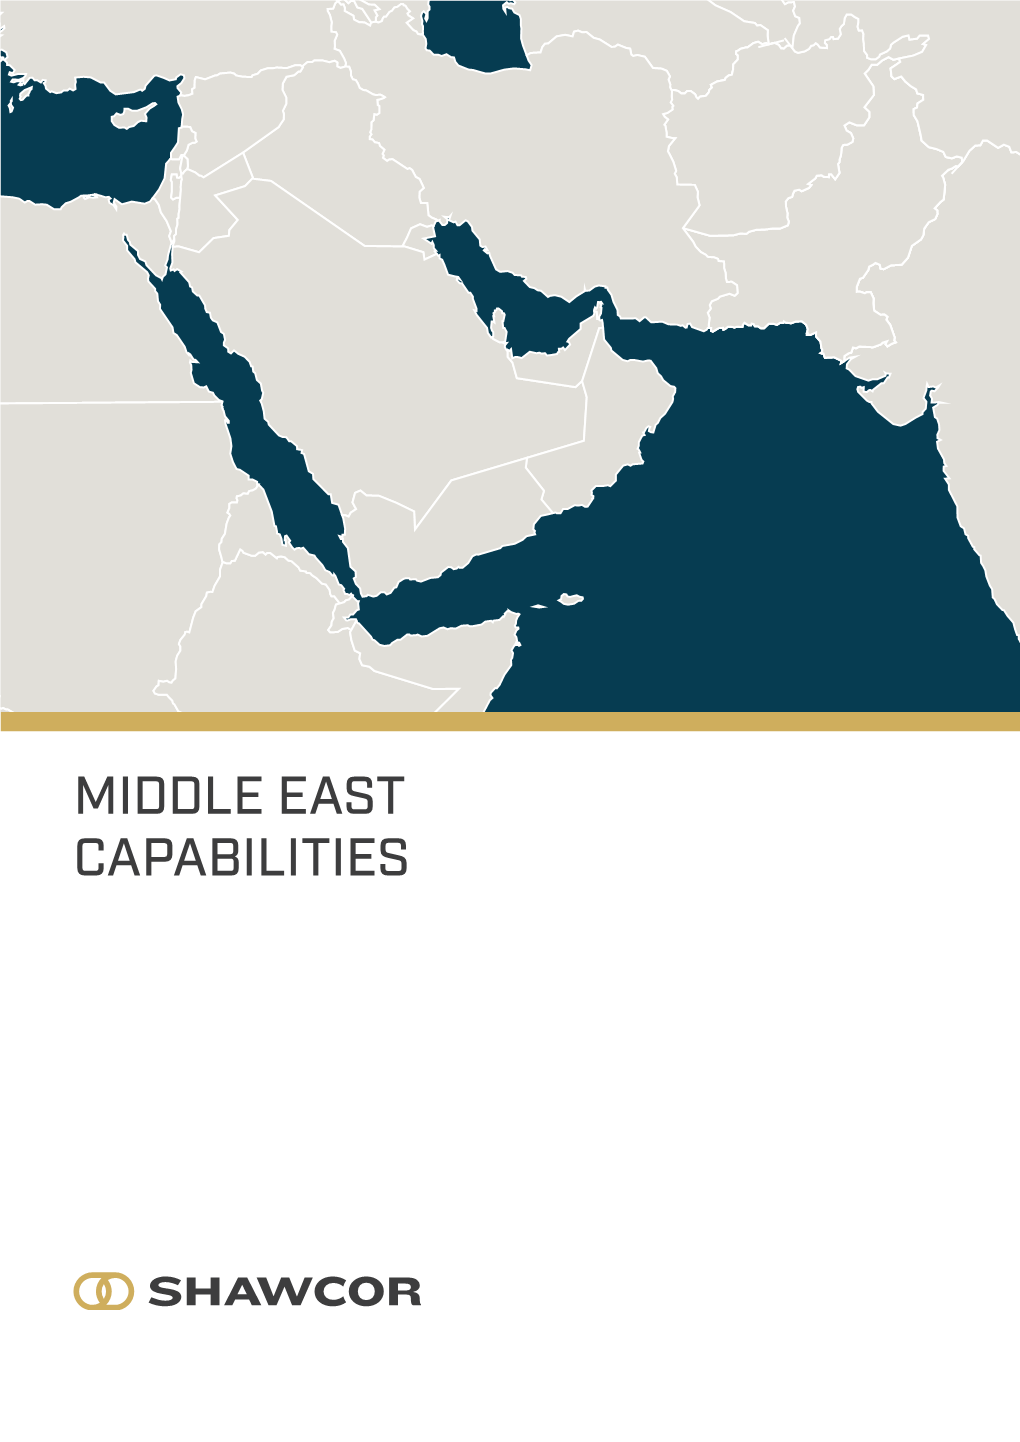 MIDDLE EAST CAPABILITIES 46% of the Worldwide Proven Oil Reserves Are Estimated to Be Commercially Recoverable